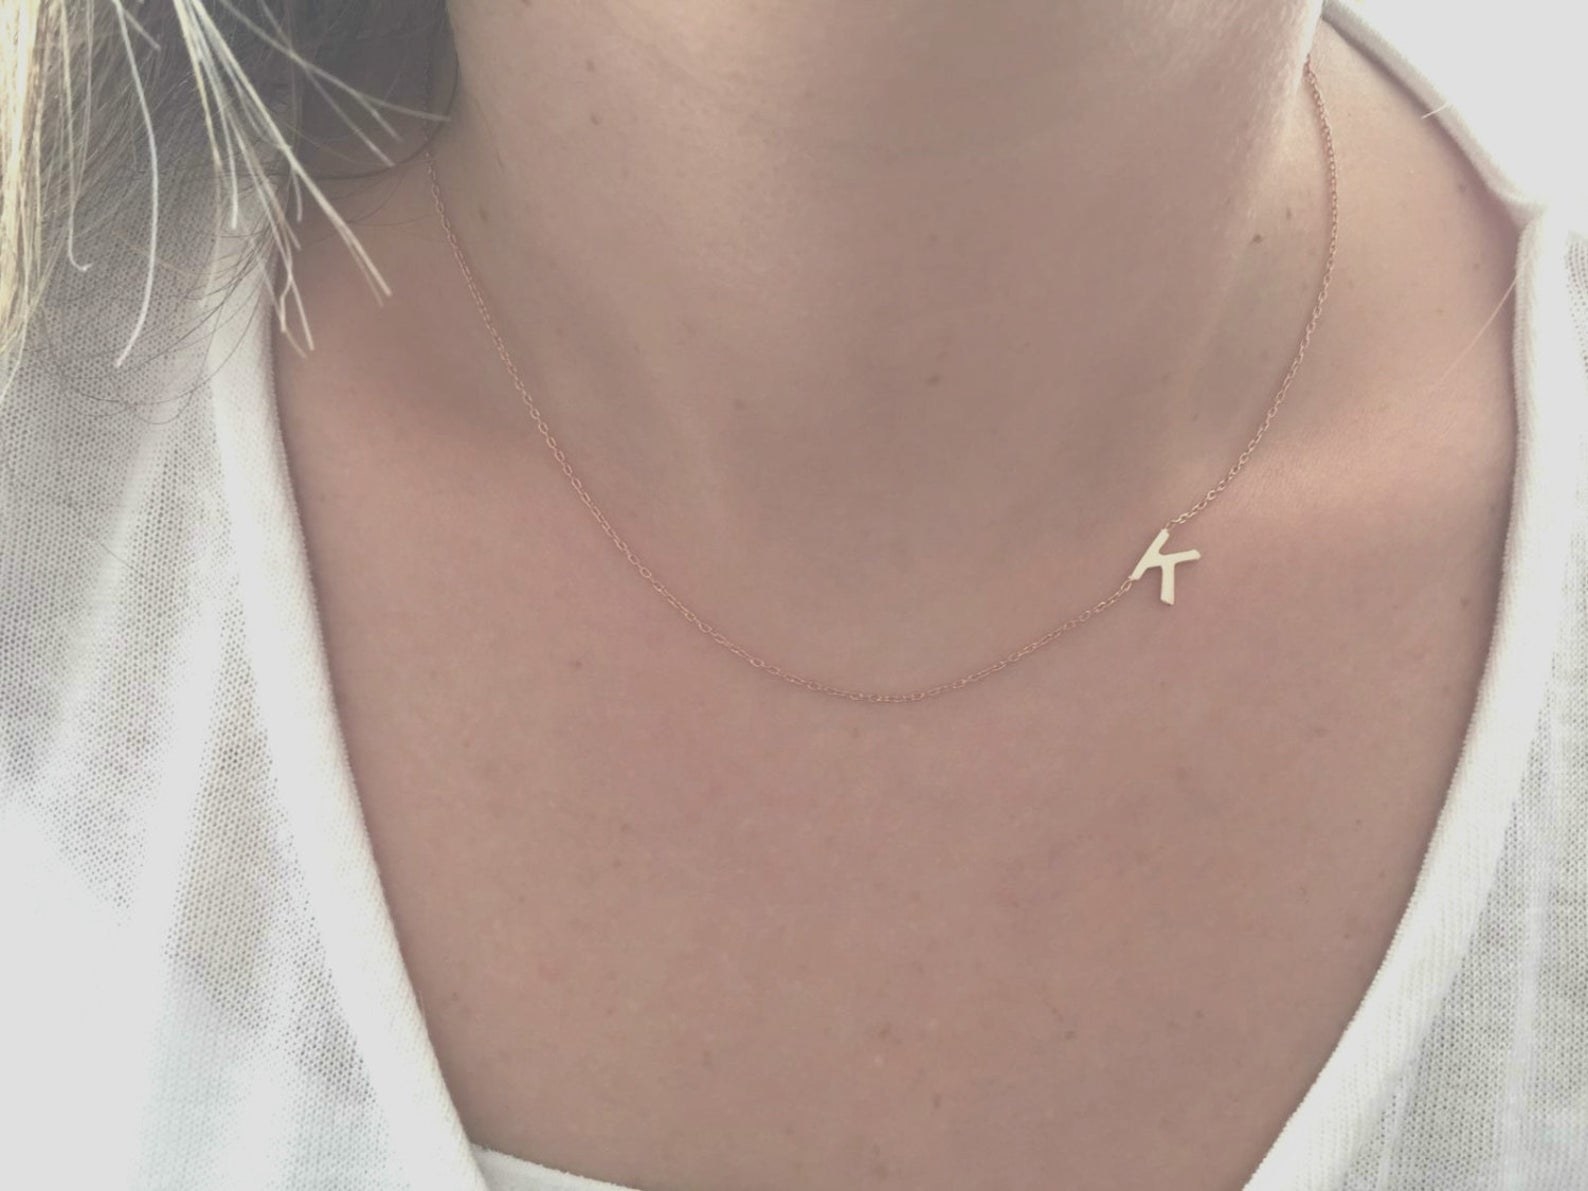 Model is wearing a dainty necklace with the letter K on it